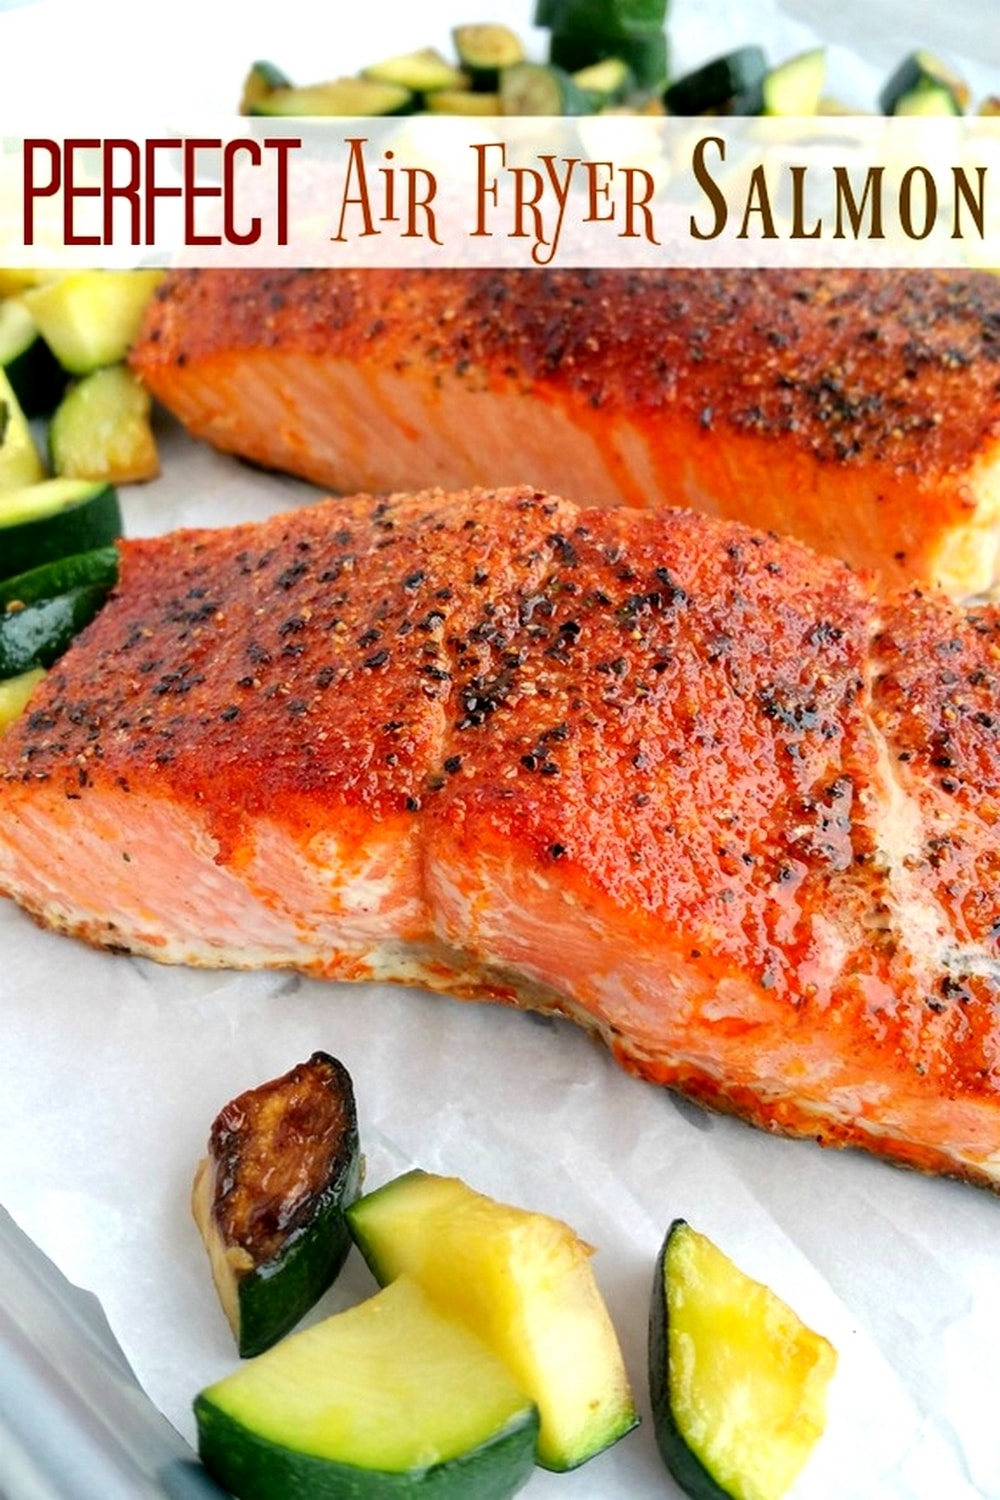 Air Fryer Salmon makes the most delicious, juicy and tender salmon every time! Salmon in the air fryer is the best way to enjoy it. via @cmpollak1